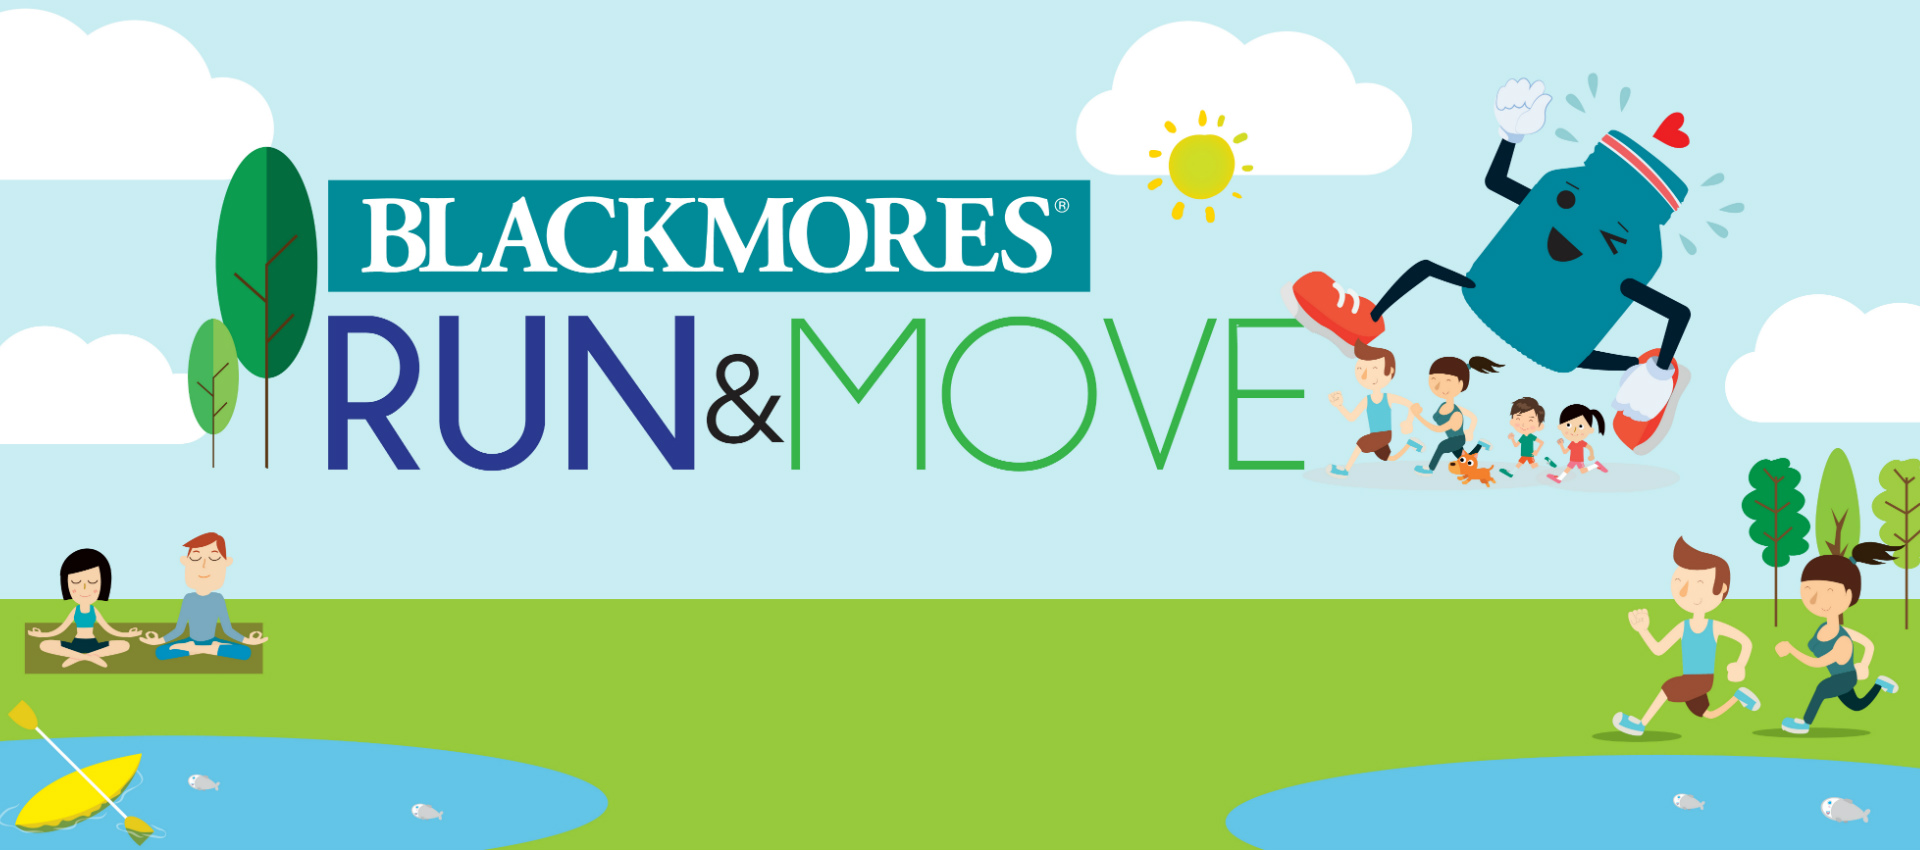 BLACKMORES RUN AND MOVE 2019 Let’s Run & Move Let’s Wellbeing